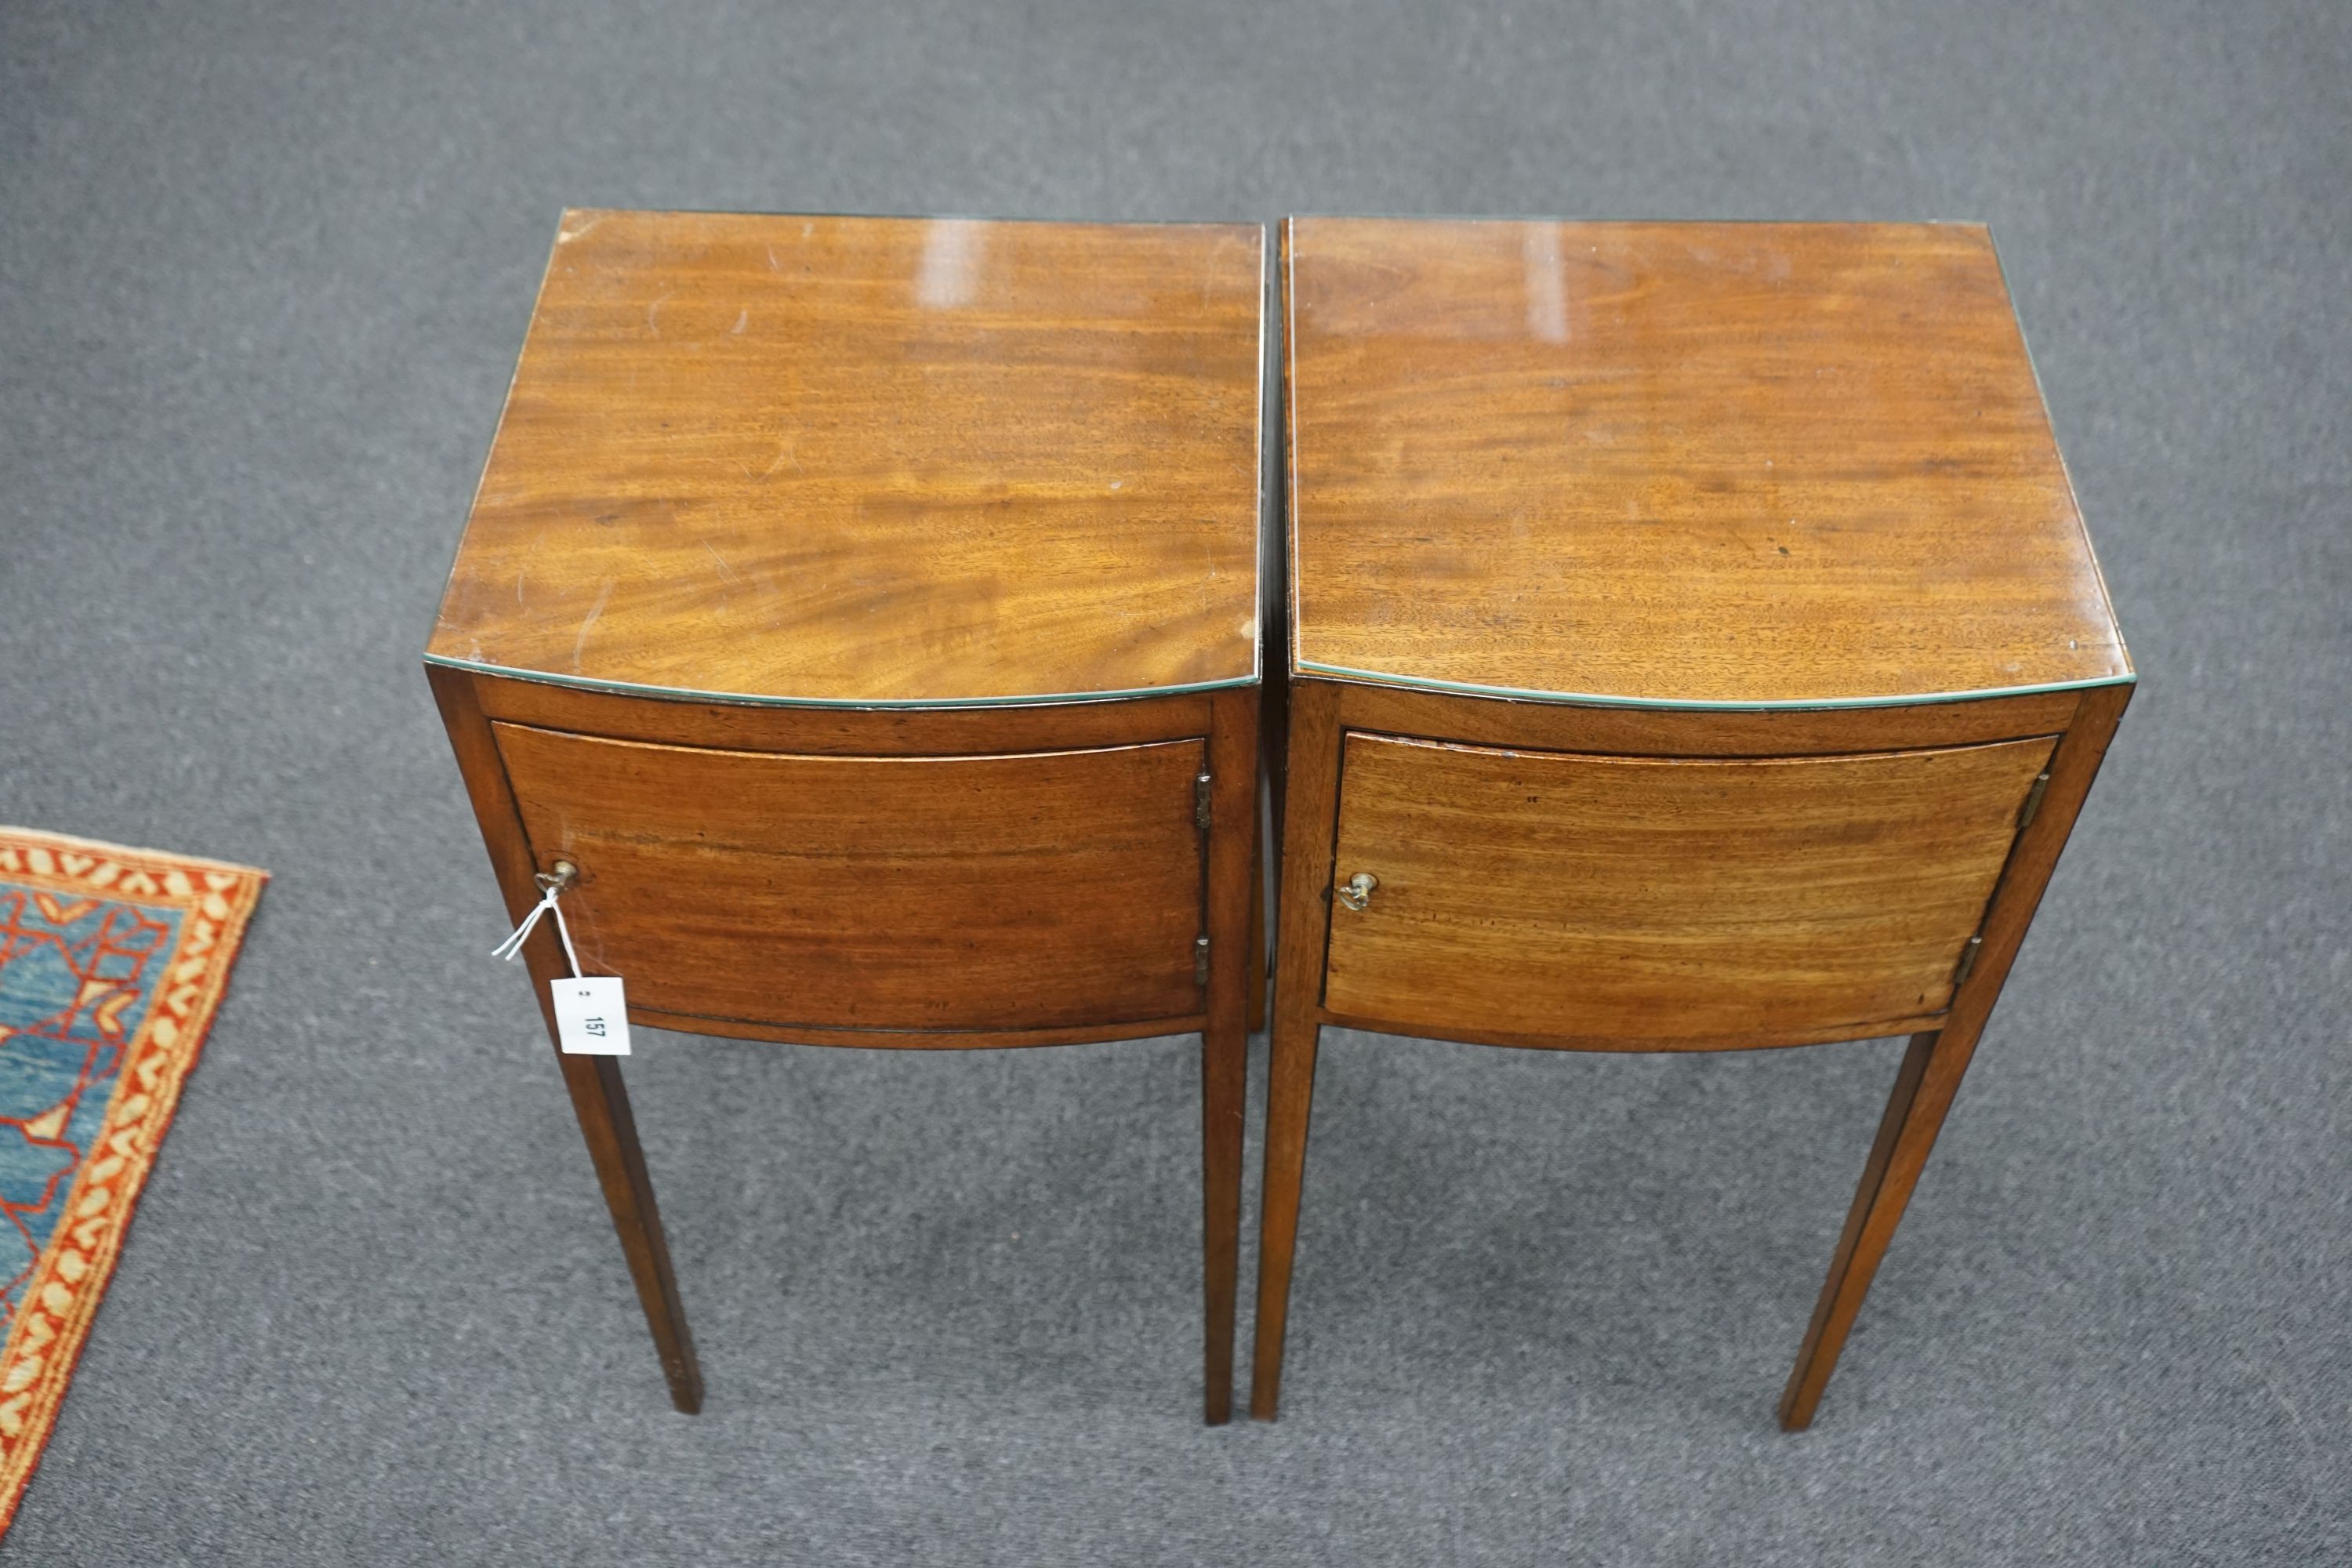 A pair of George III style mahogany bow front bedside cabinets, width 38cm, depth 36cm, height 76cm